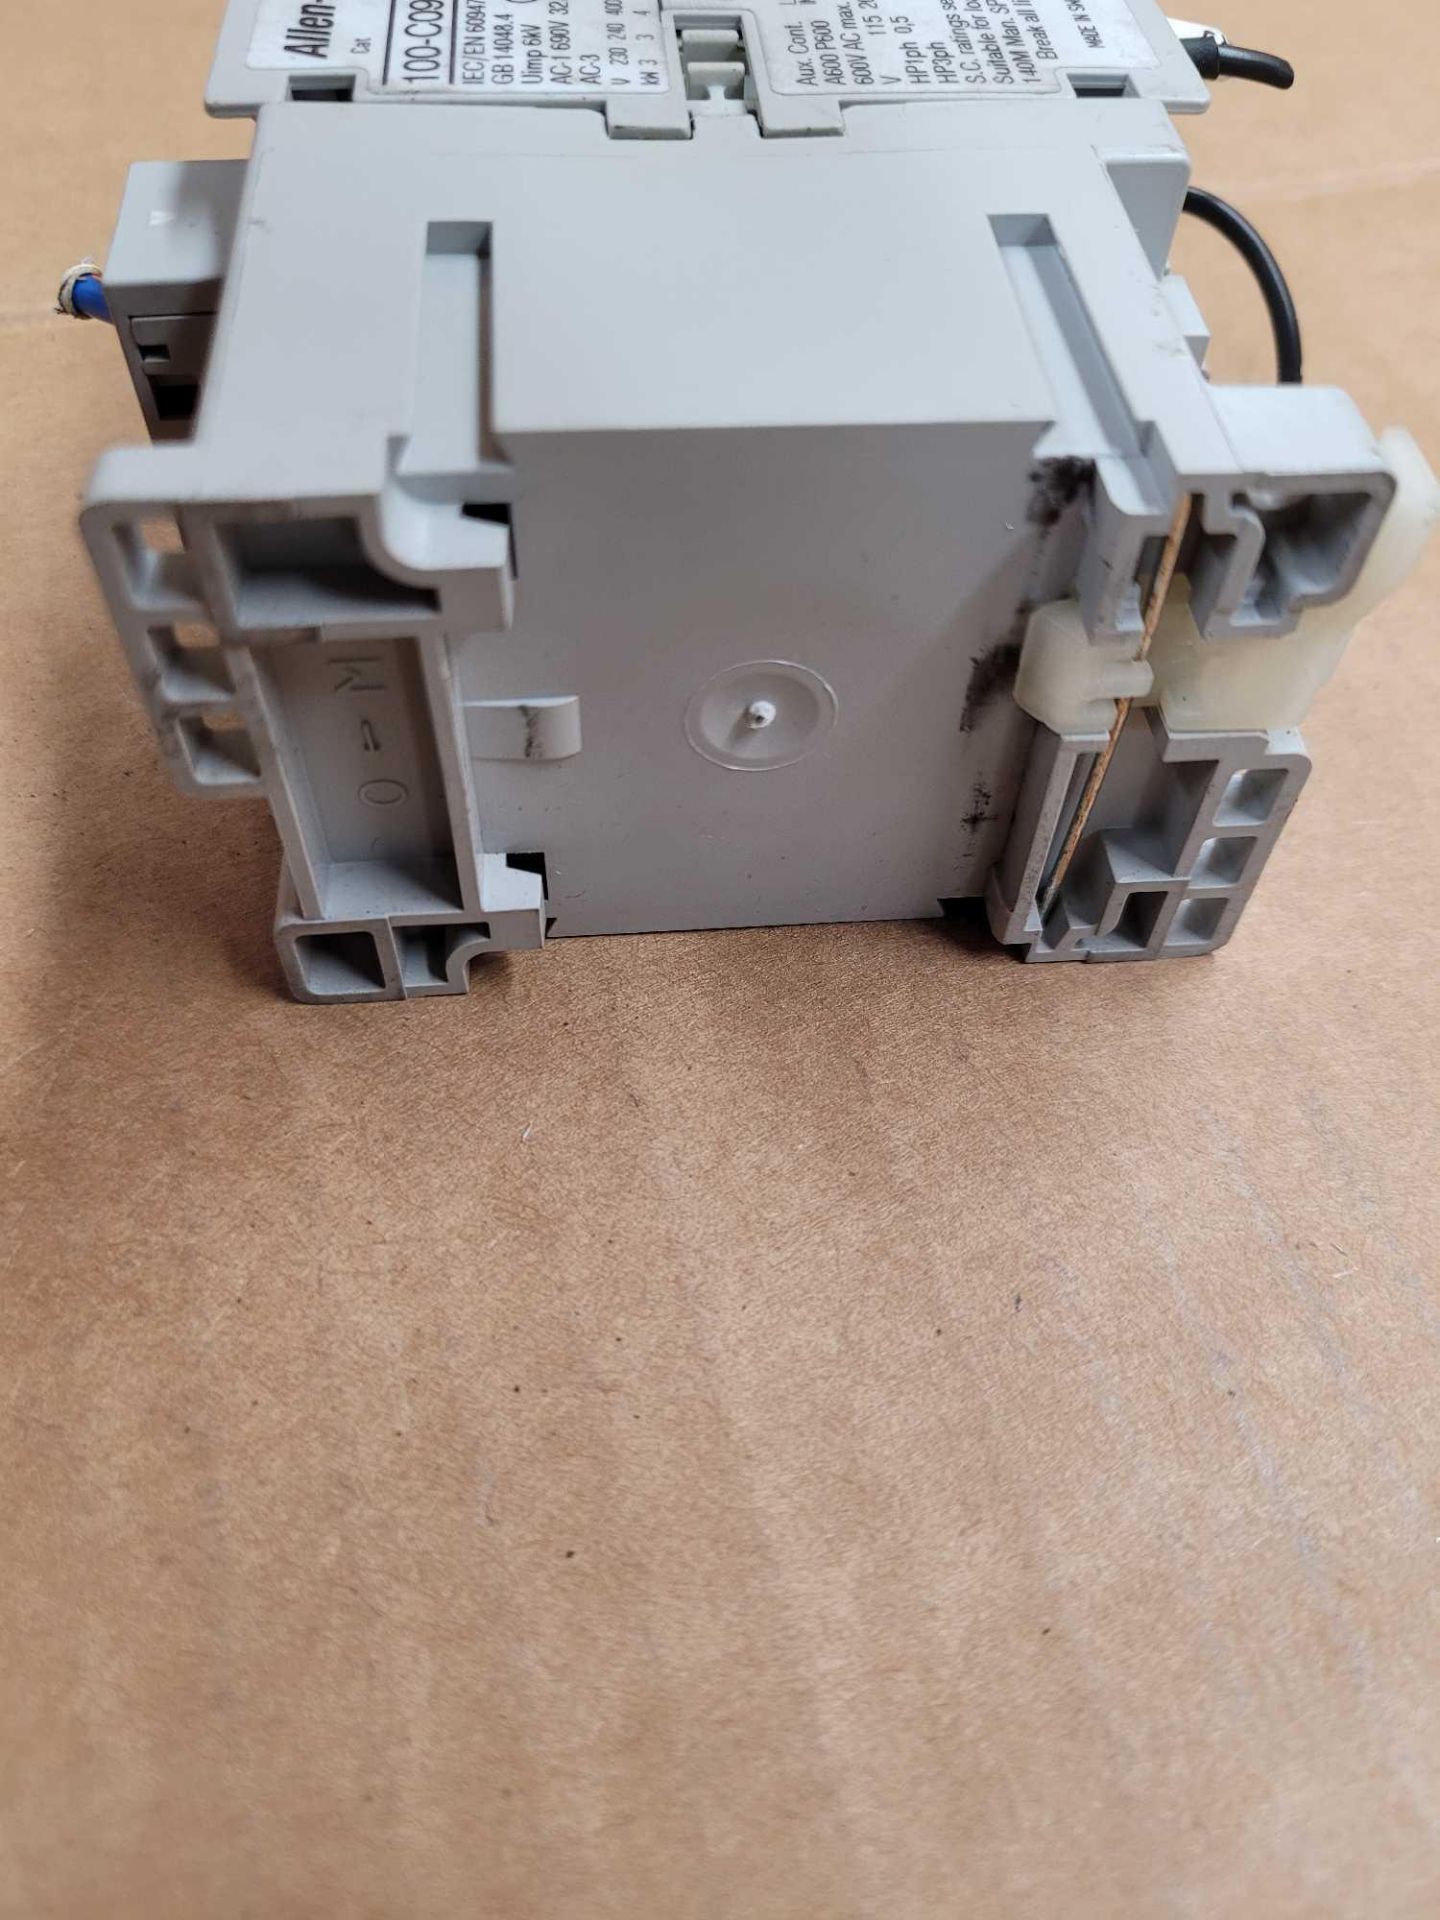 LOT OF 6 ALLEN BRADLEY 100-C09E*10 / Series A Contactor  /  Lot Weight: 5.2 lbs - Image 6 of 8